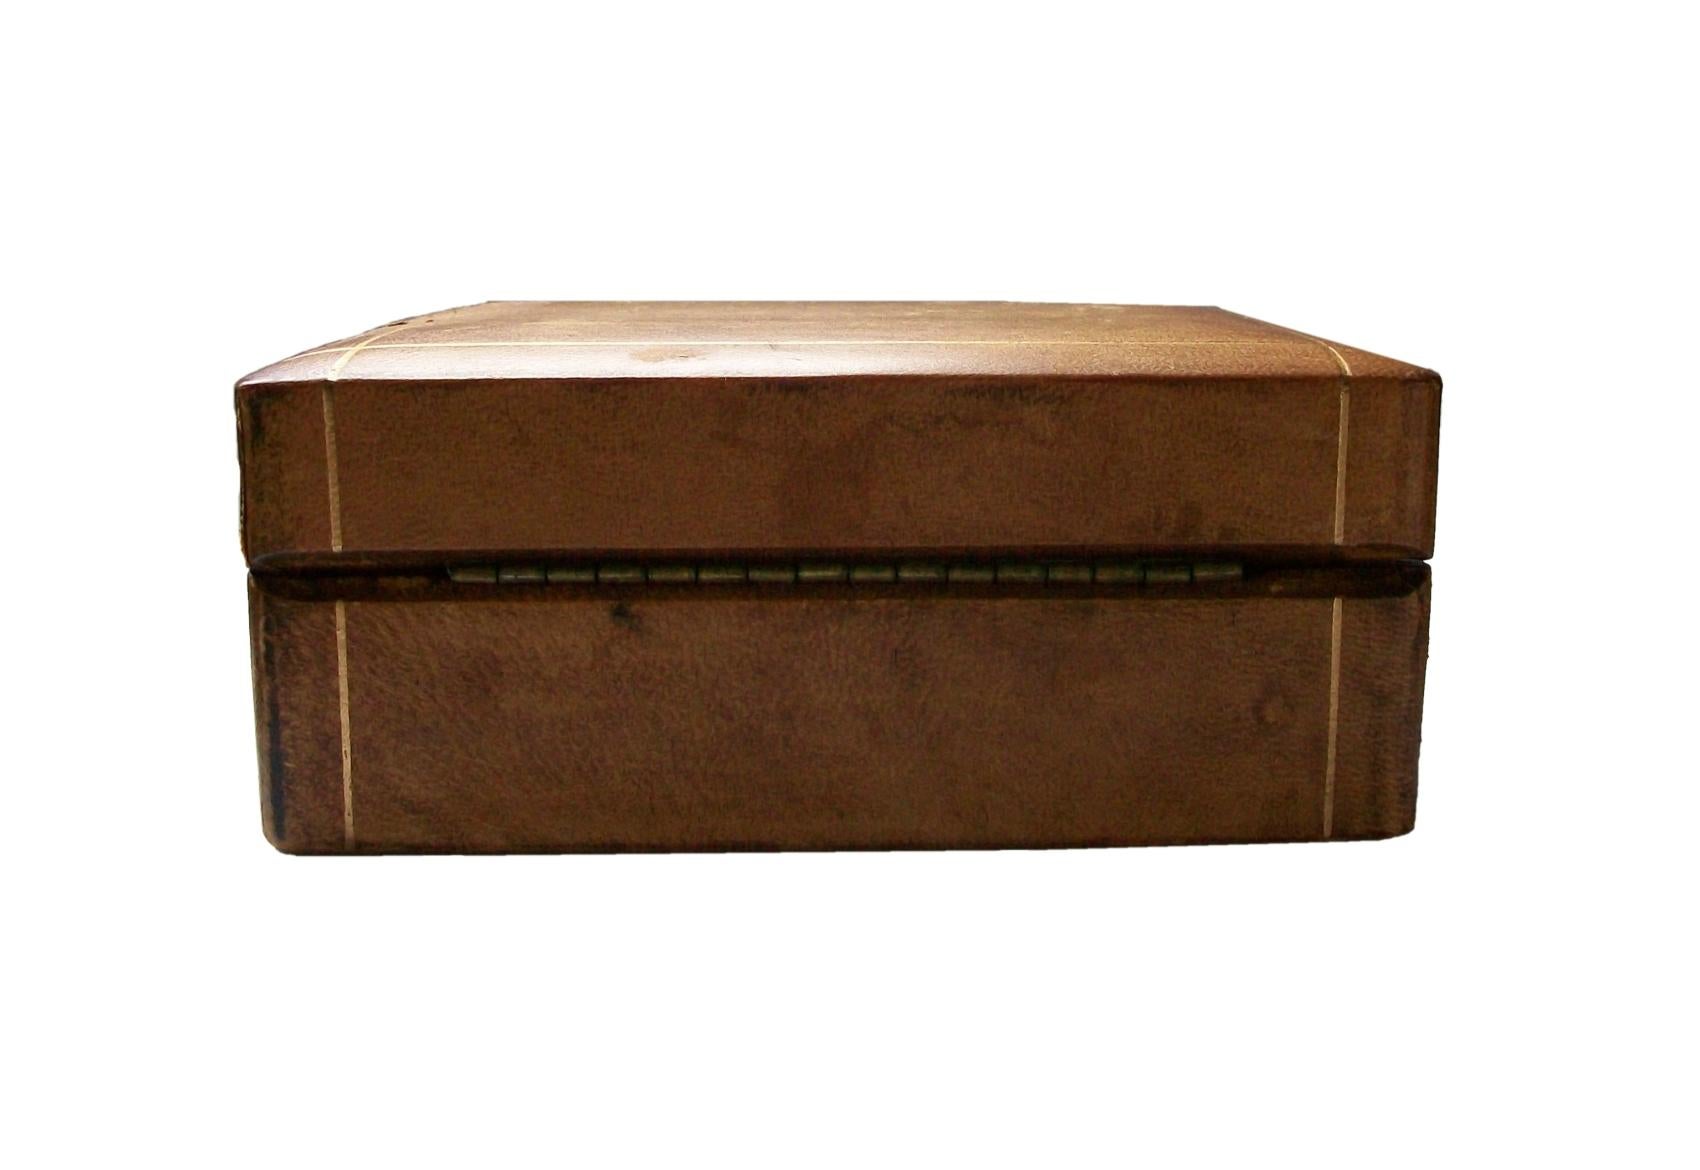 Italian Midcentury Leather Box - Gilded Details - Wood Lined - Italy - circa 1950s For Sale